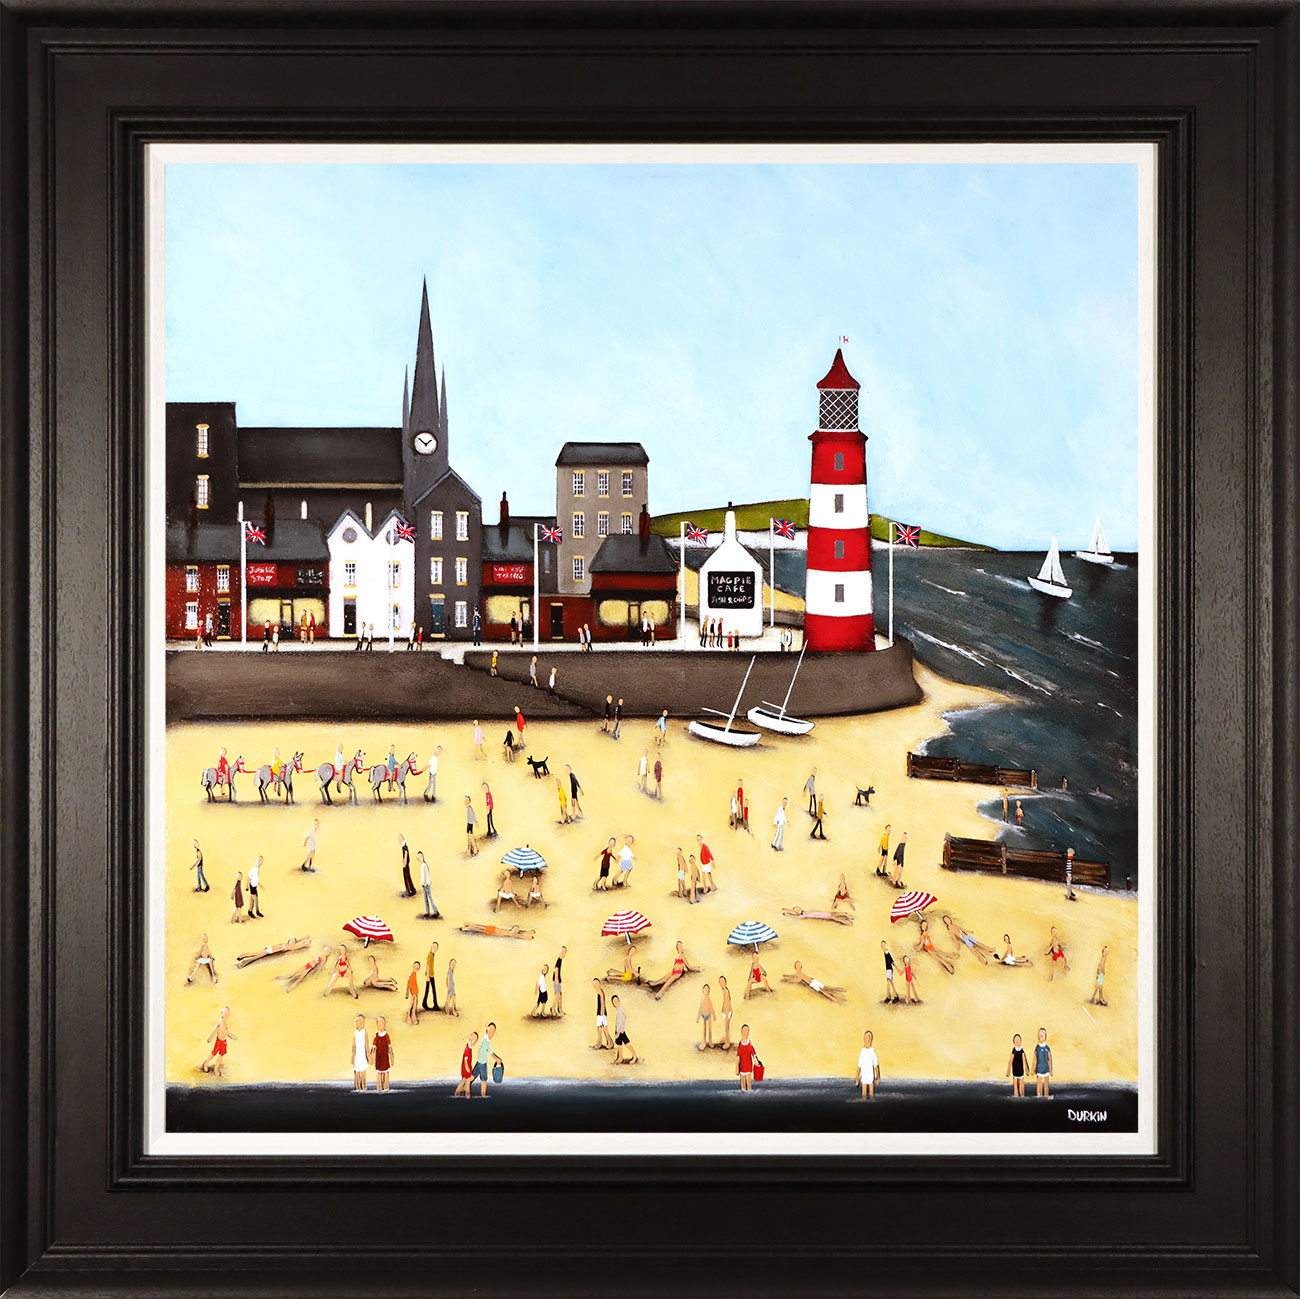 Sean Durkin, Original oil painting on panel, A Day at the Seaside Click to enlarge